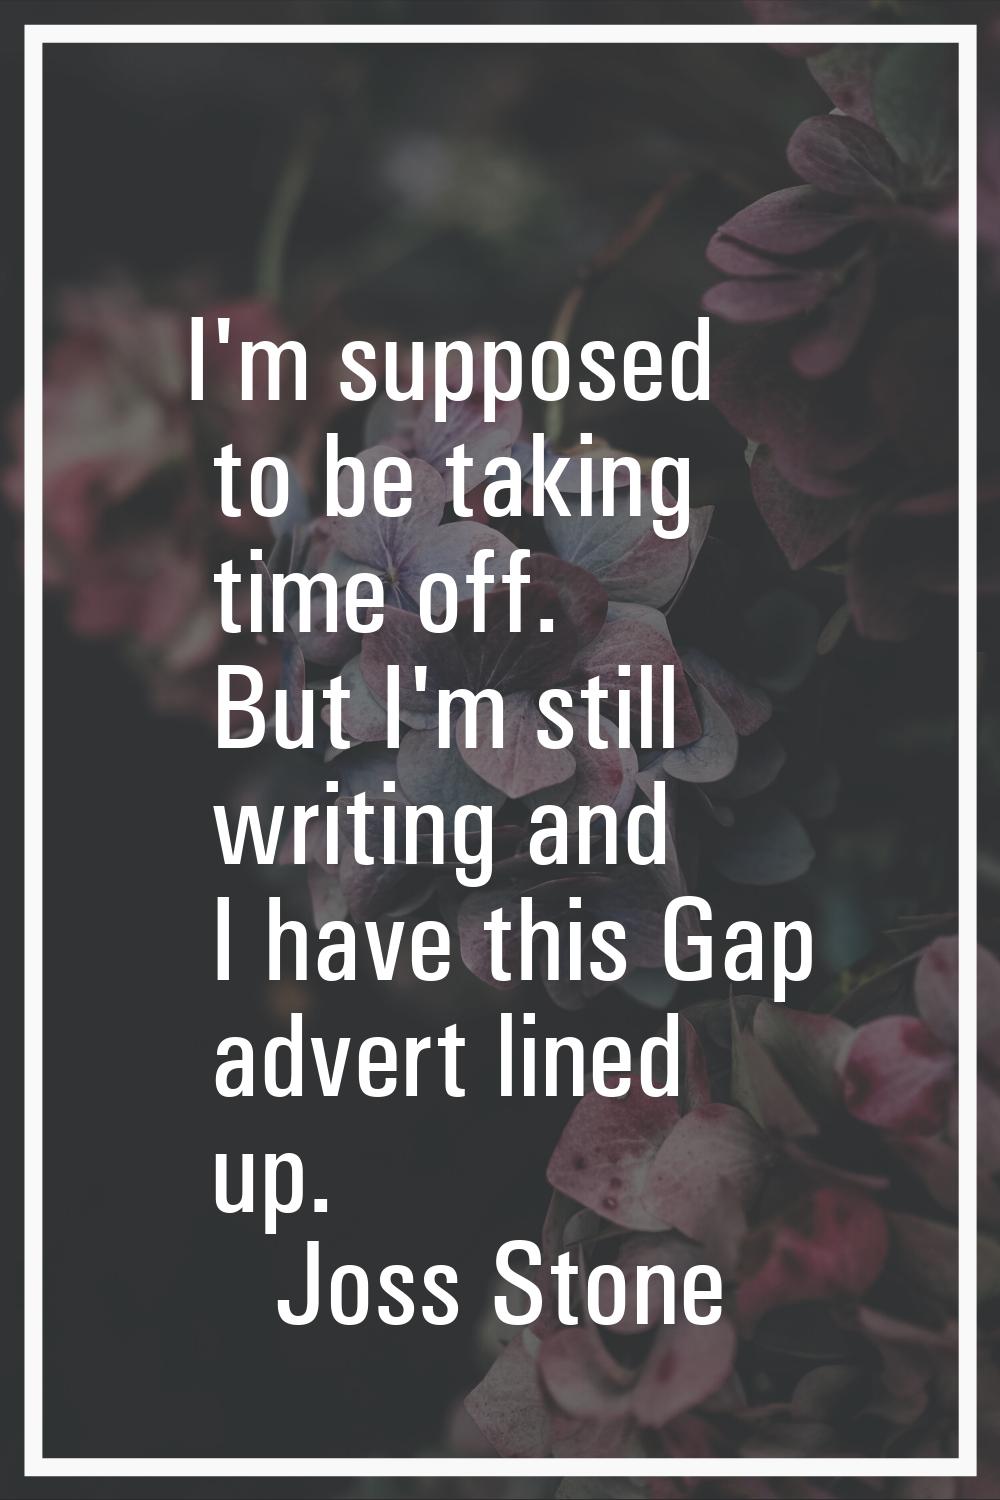 I'm supposed to be taking time off. But I'm still writing and I have this Gap advert lined up.